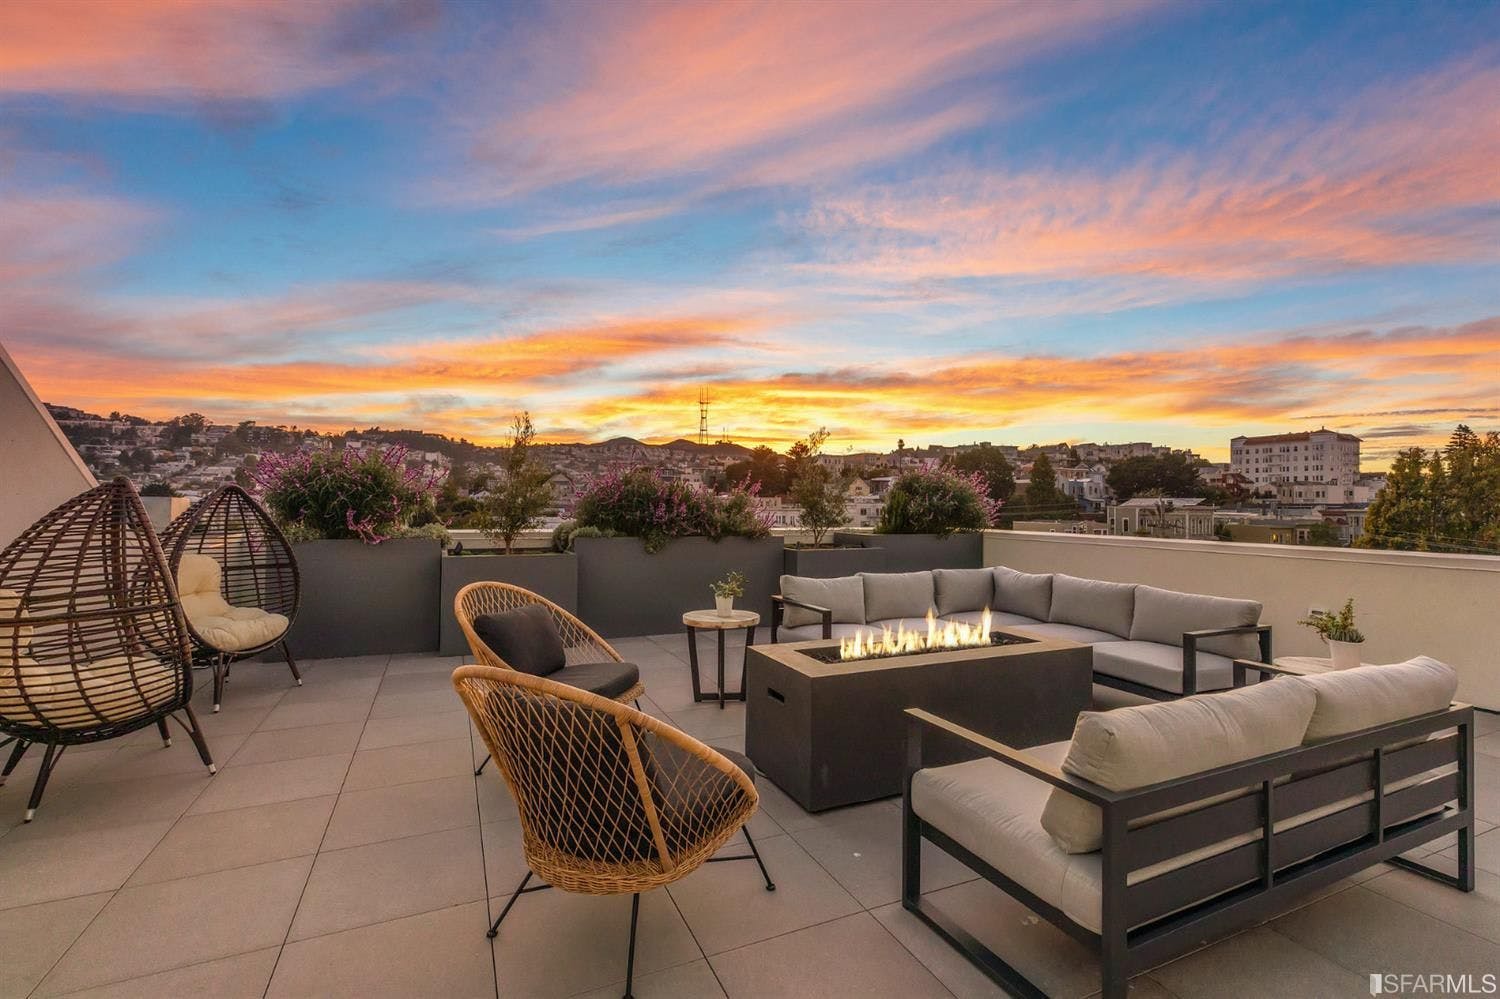 Mission Modern boasts a high-class roof deck with panoramic views, a barbecue, a fire pit, and lounge seating that make the perfect space for gatherings or relaxation. 